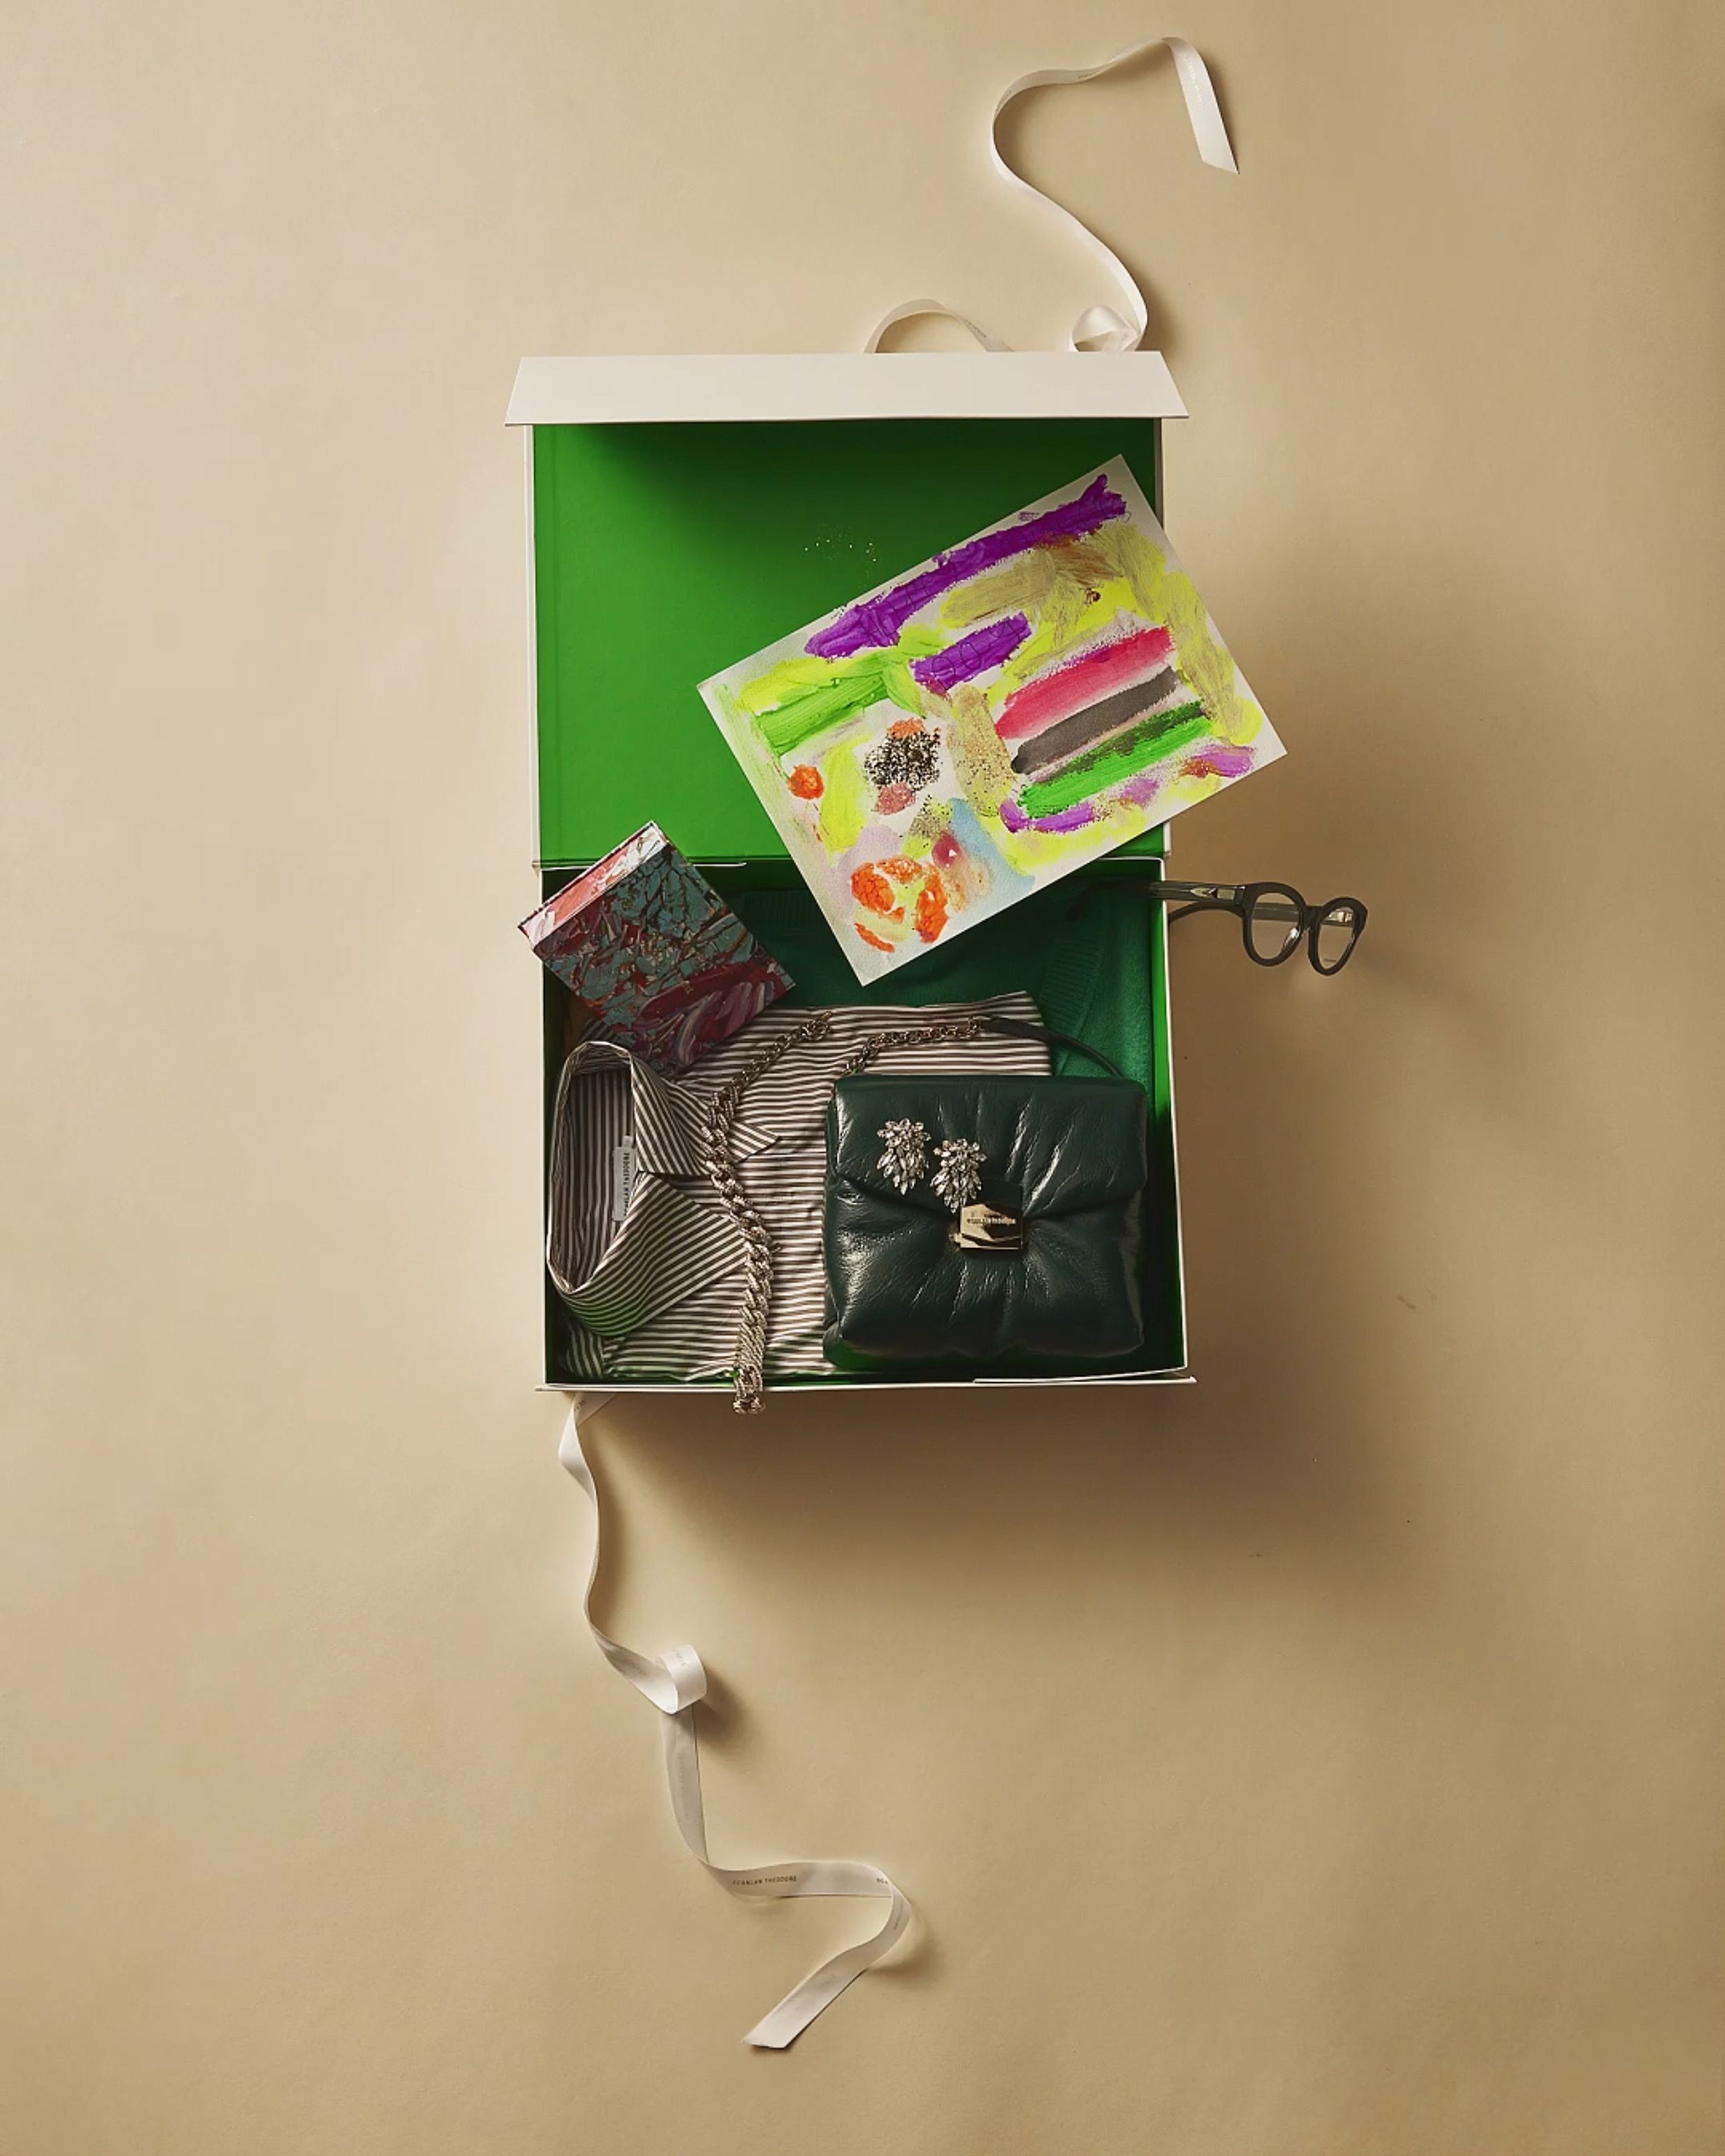 Flatlay of an open green gift box with green pillow bag, black and white striped shirt, and child's drawing